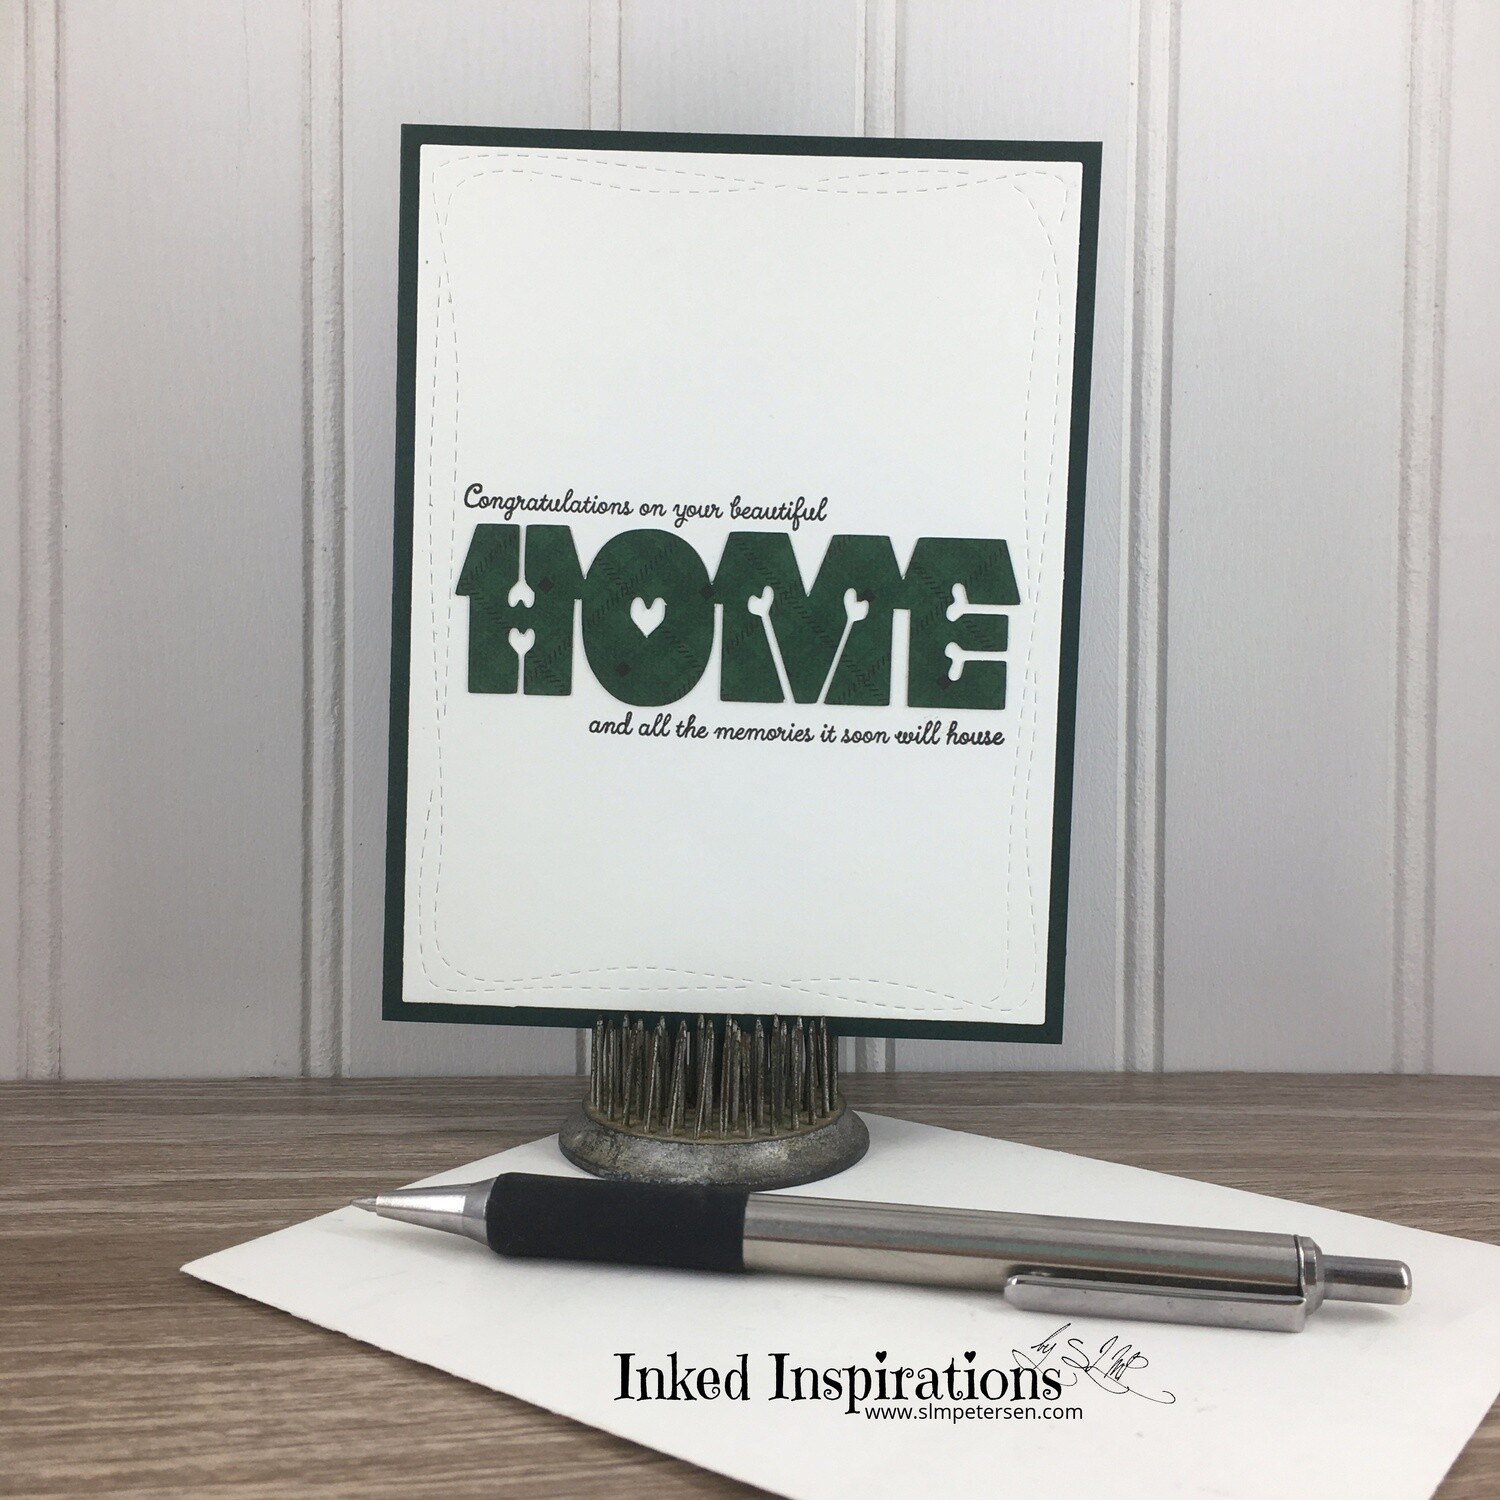 Congratulations on Your New Home - Green Plaid